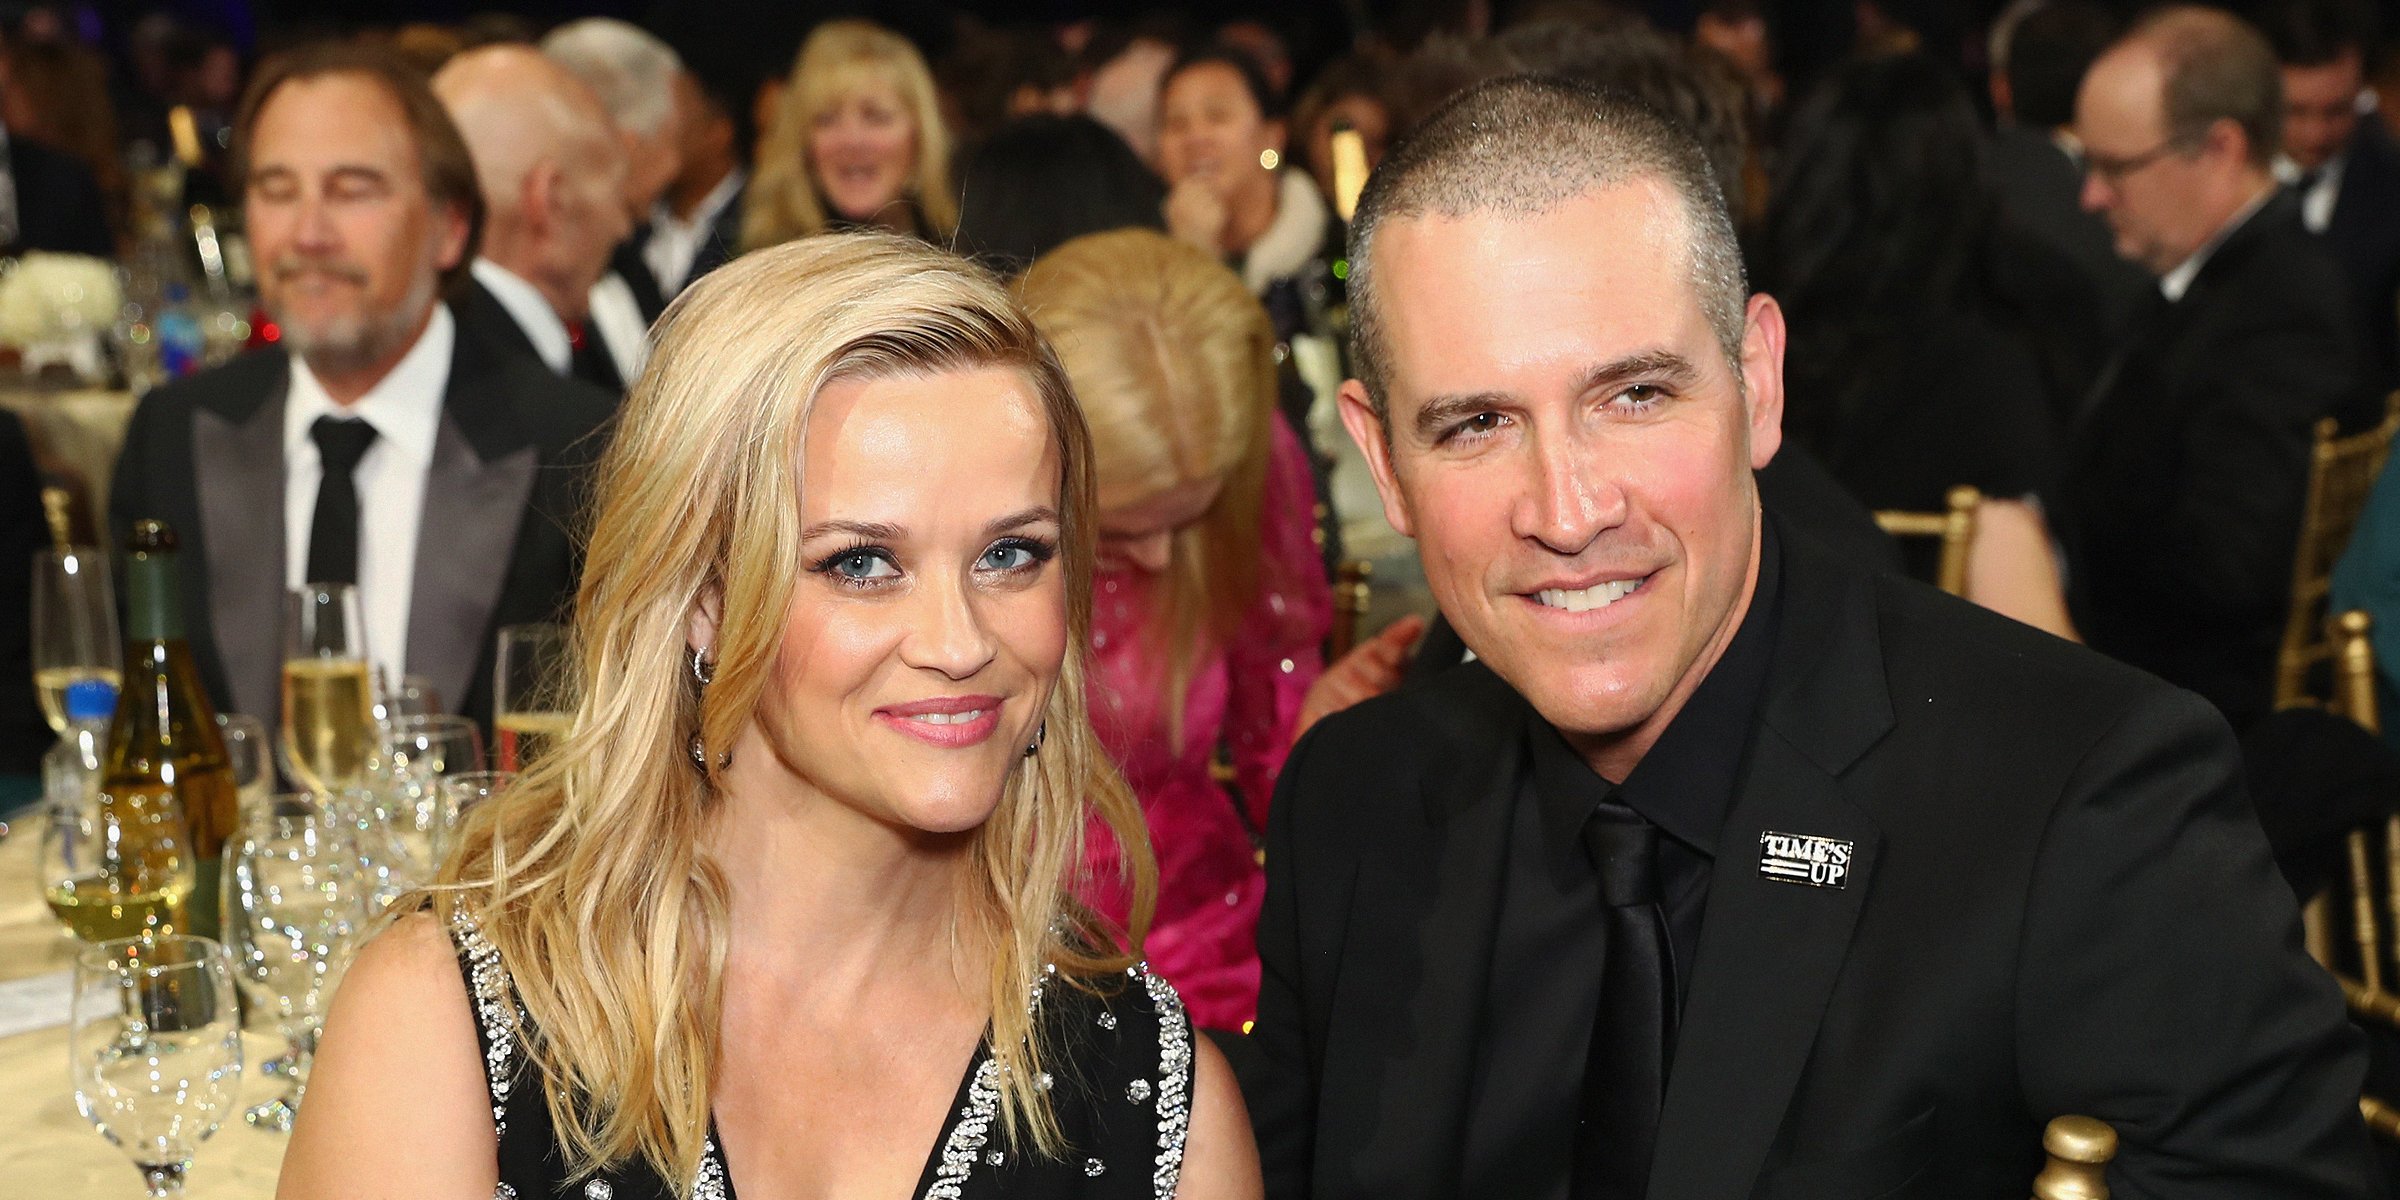 Reese Witherspoon and her husband Jim Toth. | Source: Getty Images 